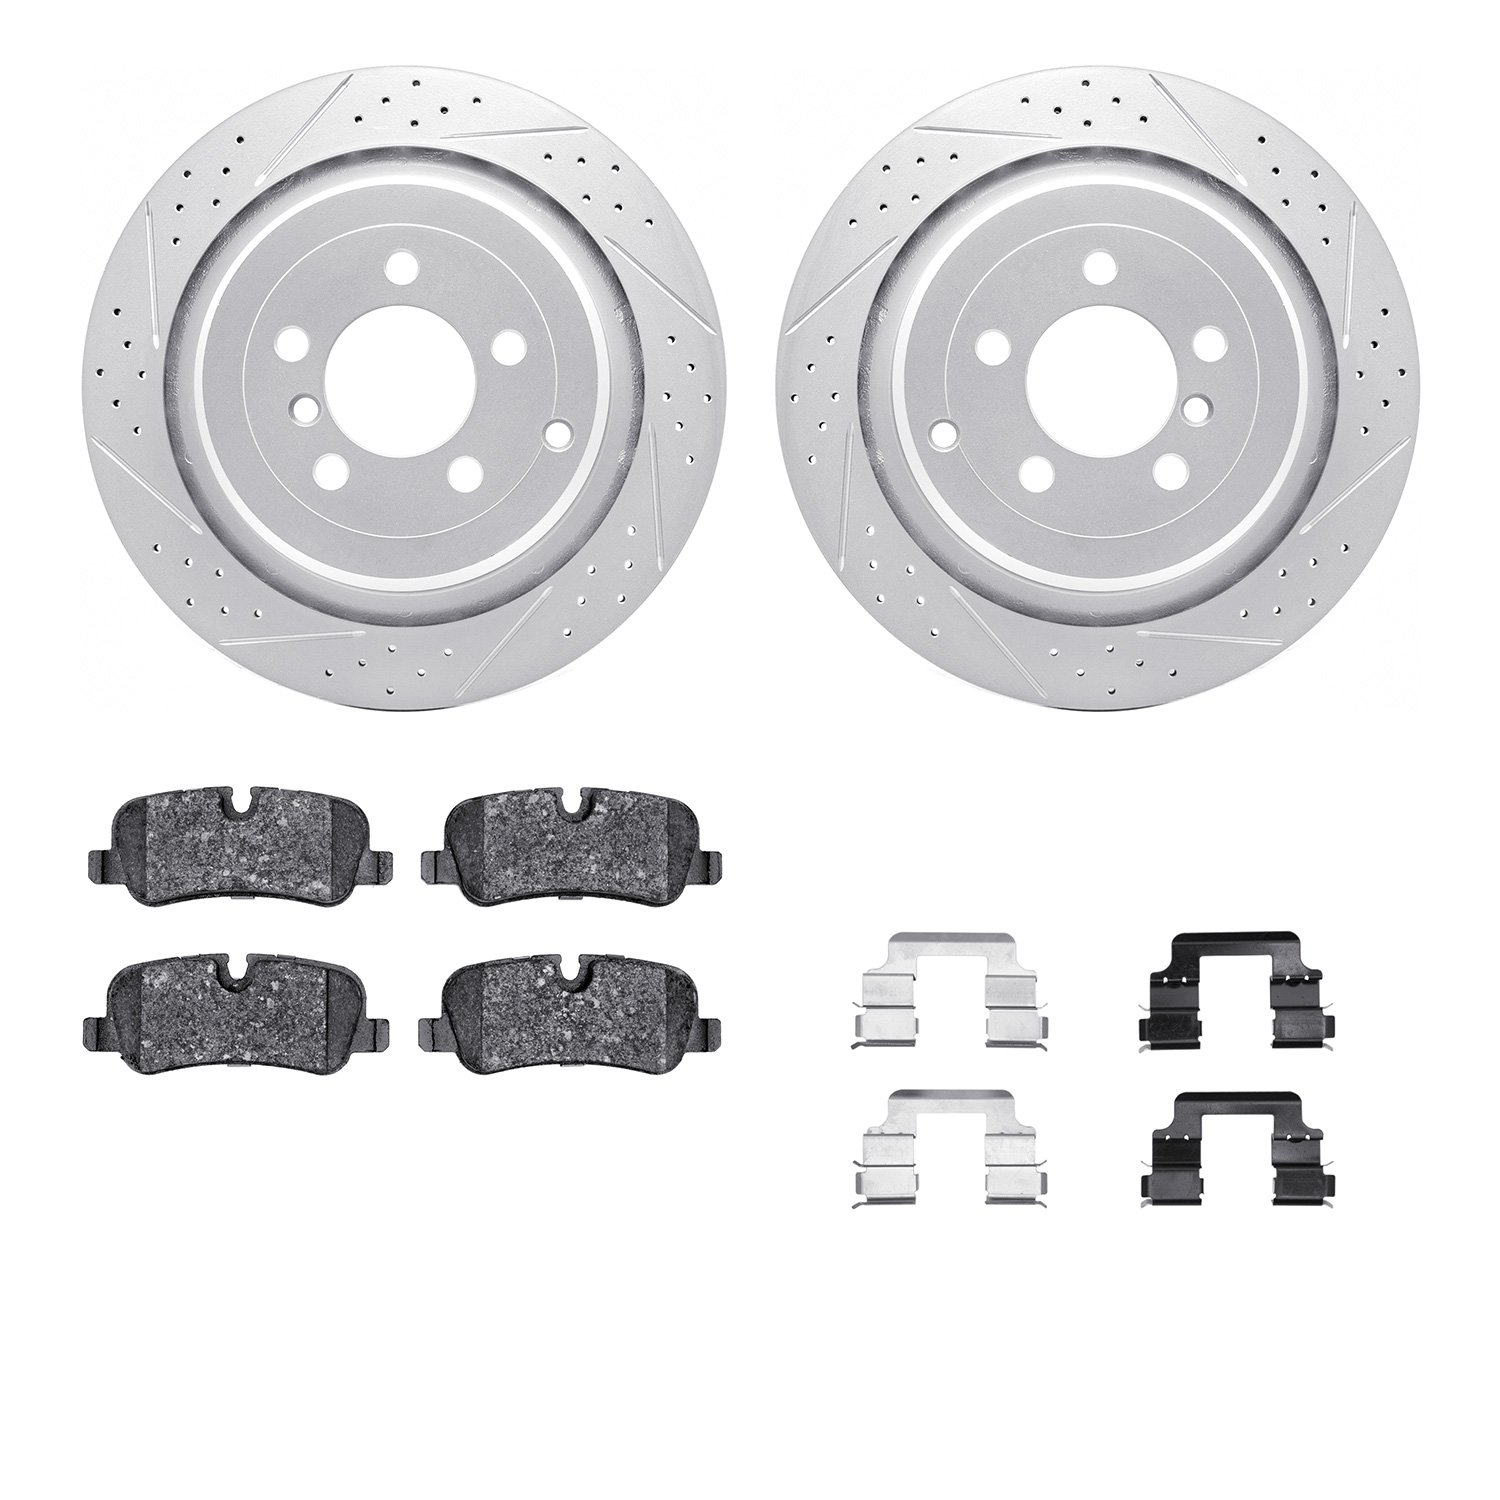 2512-11017 Geoperformance Drilled/Slotted Rotors w/5000 Advanced Brake Pads Kit & Hardware, 2006-2012 Land Rover, Position: Rear